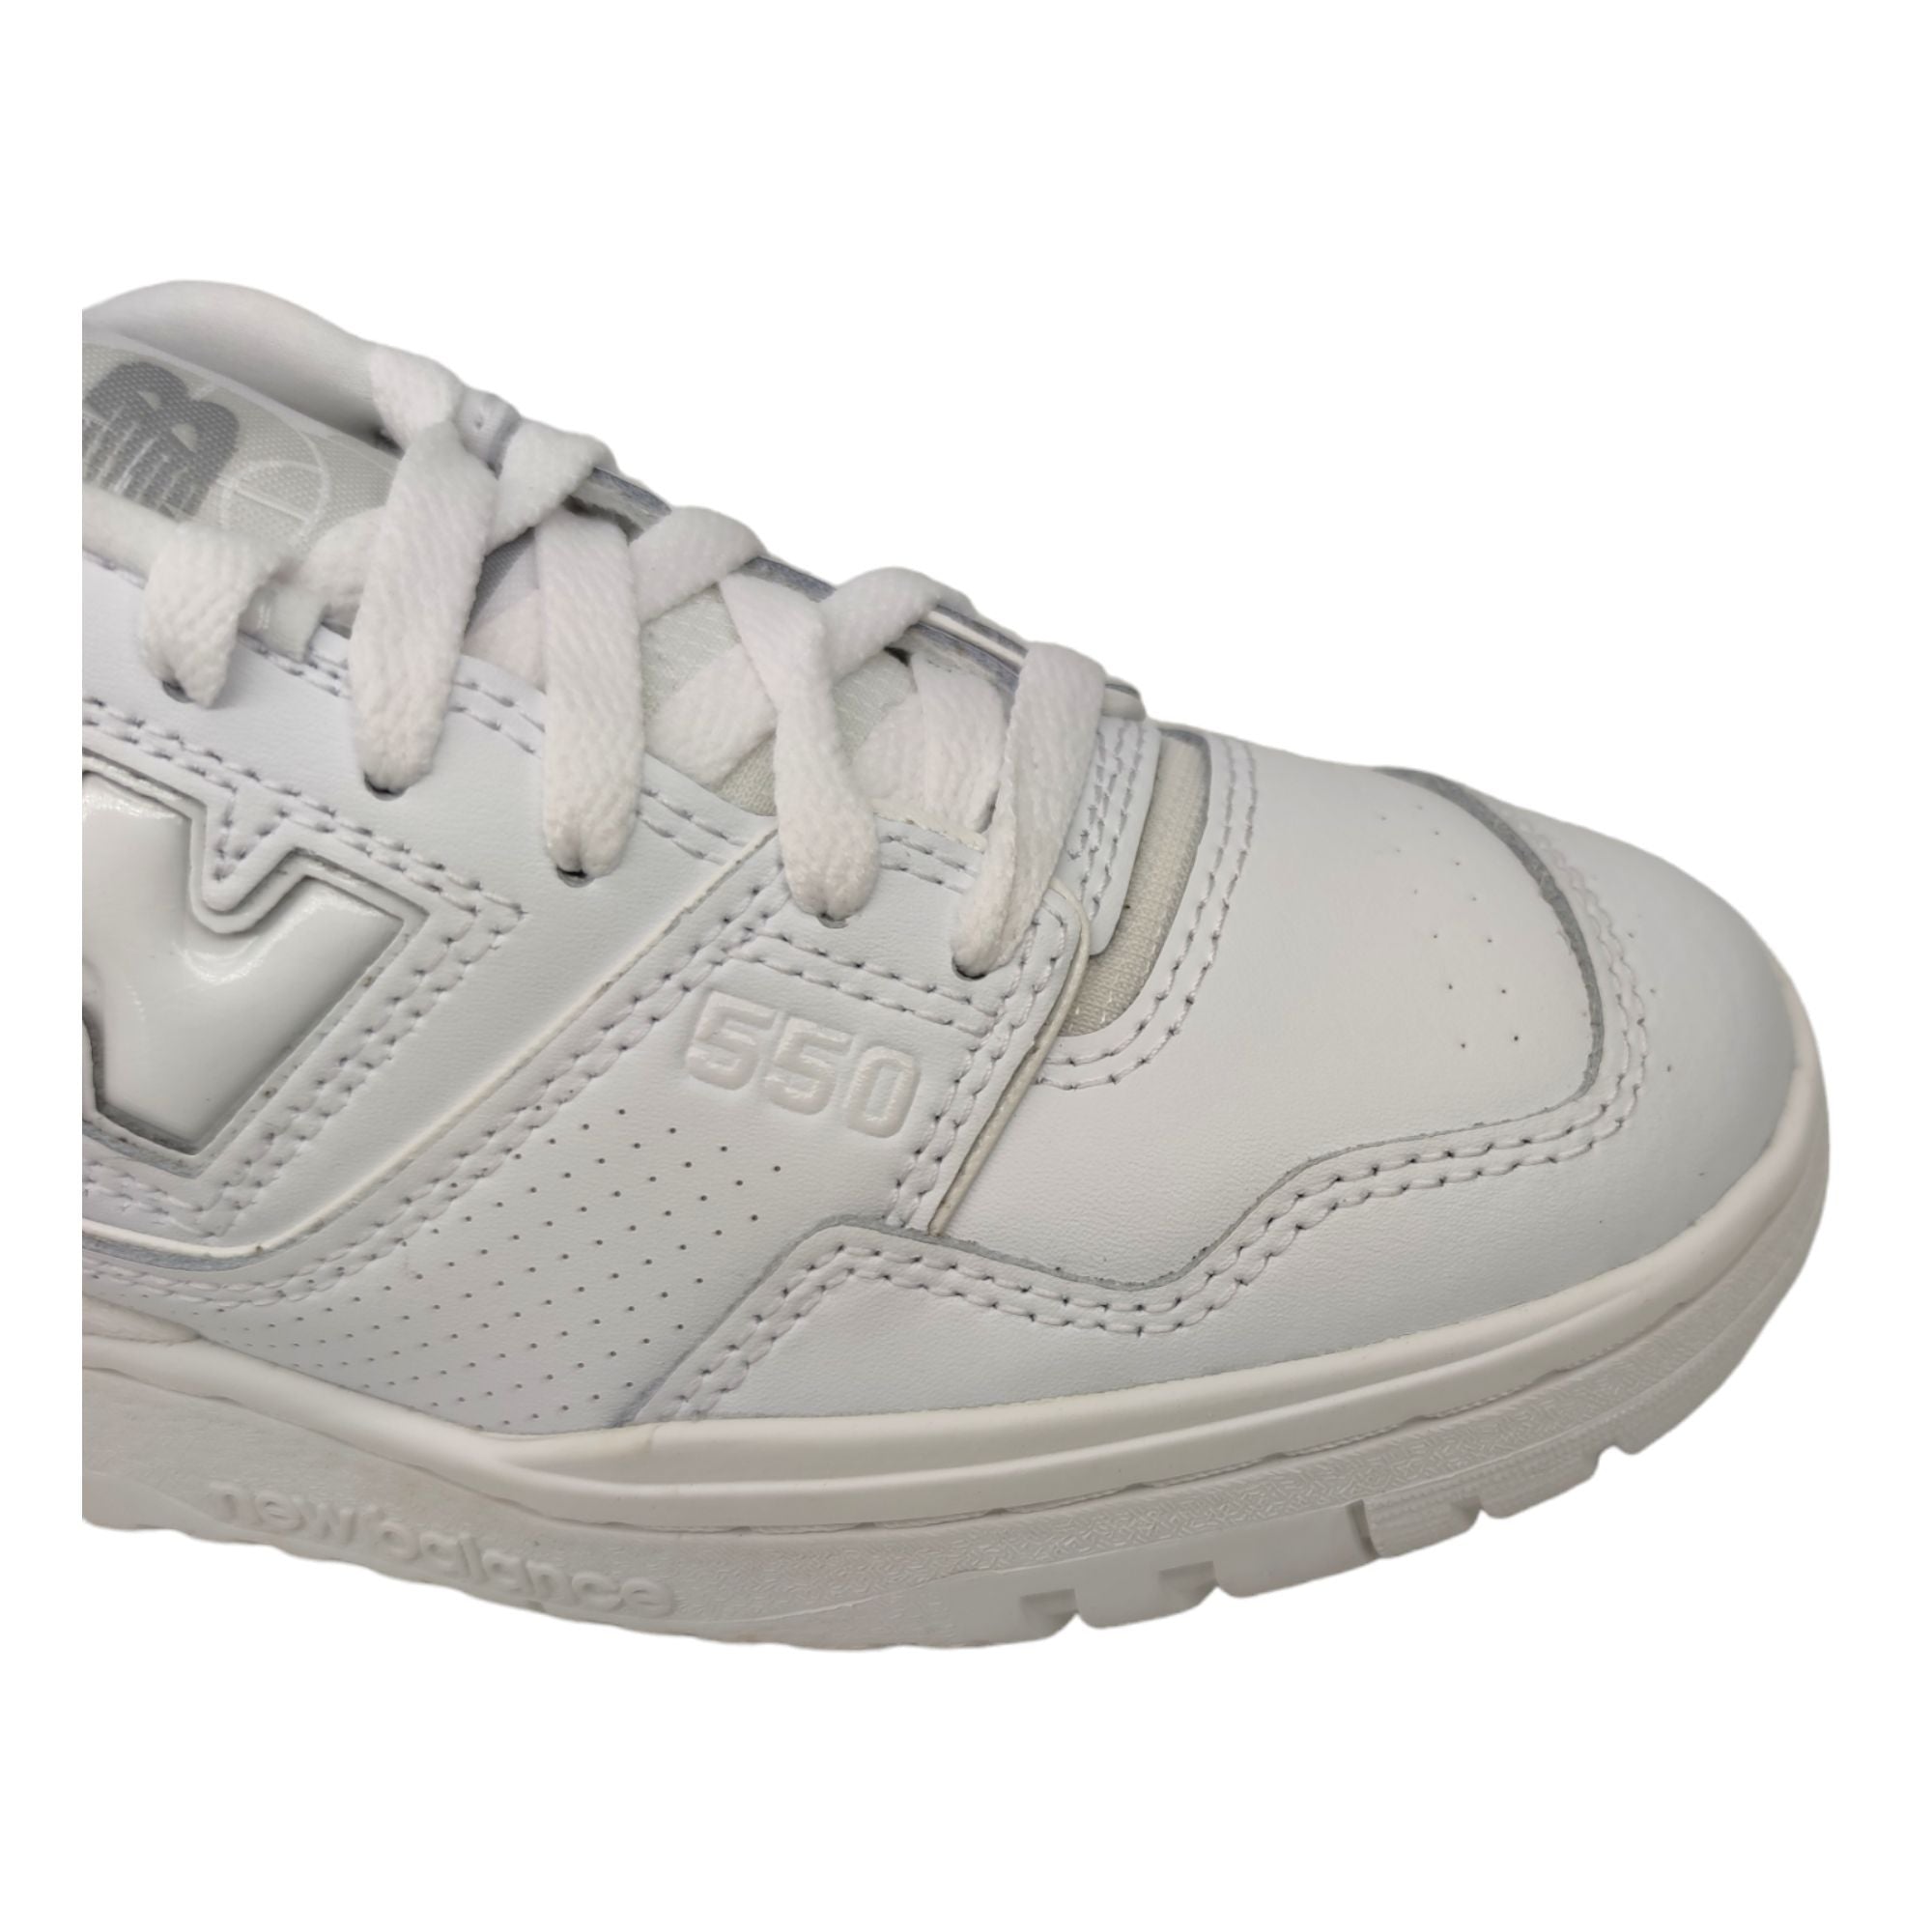 Women's 550 Shoes All White 